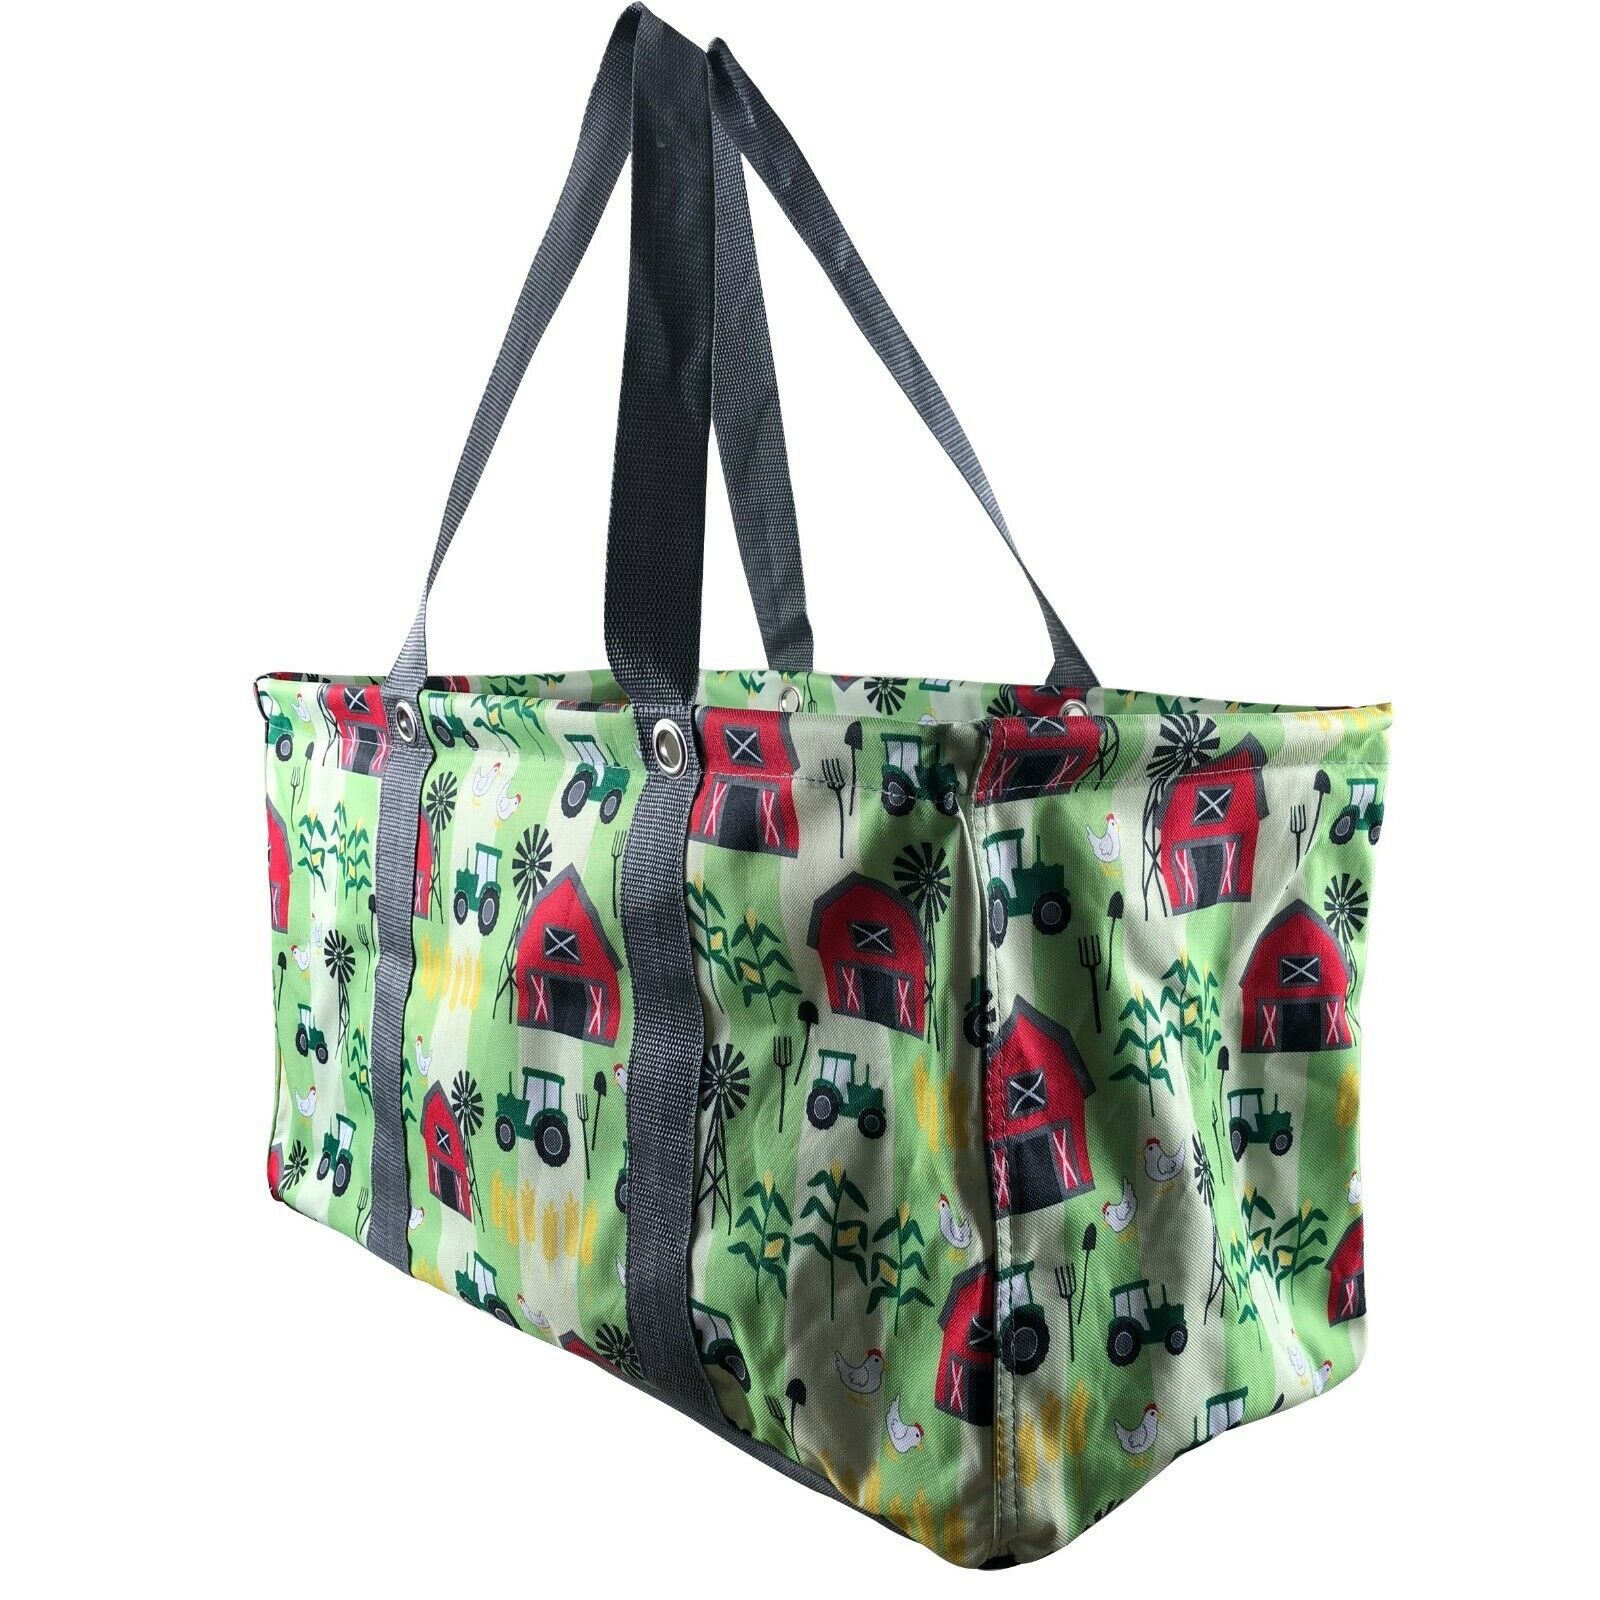 31 BAGS THIRTY ONE LARGE UTILITY TOTE DAISY CRAZE TRAVEL BEACH